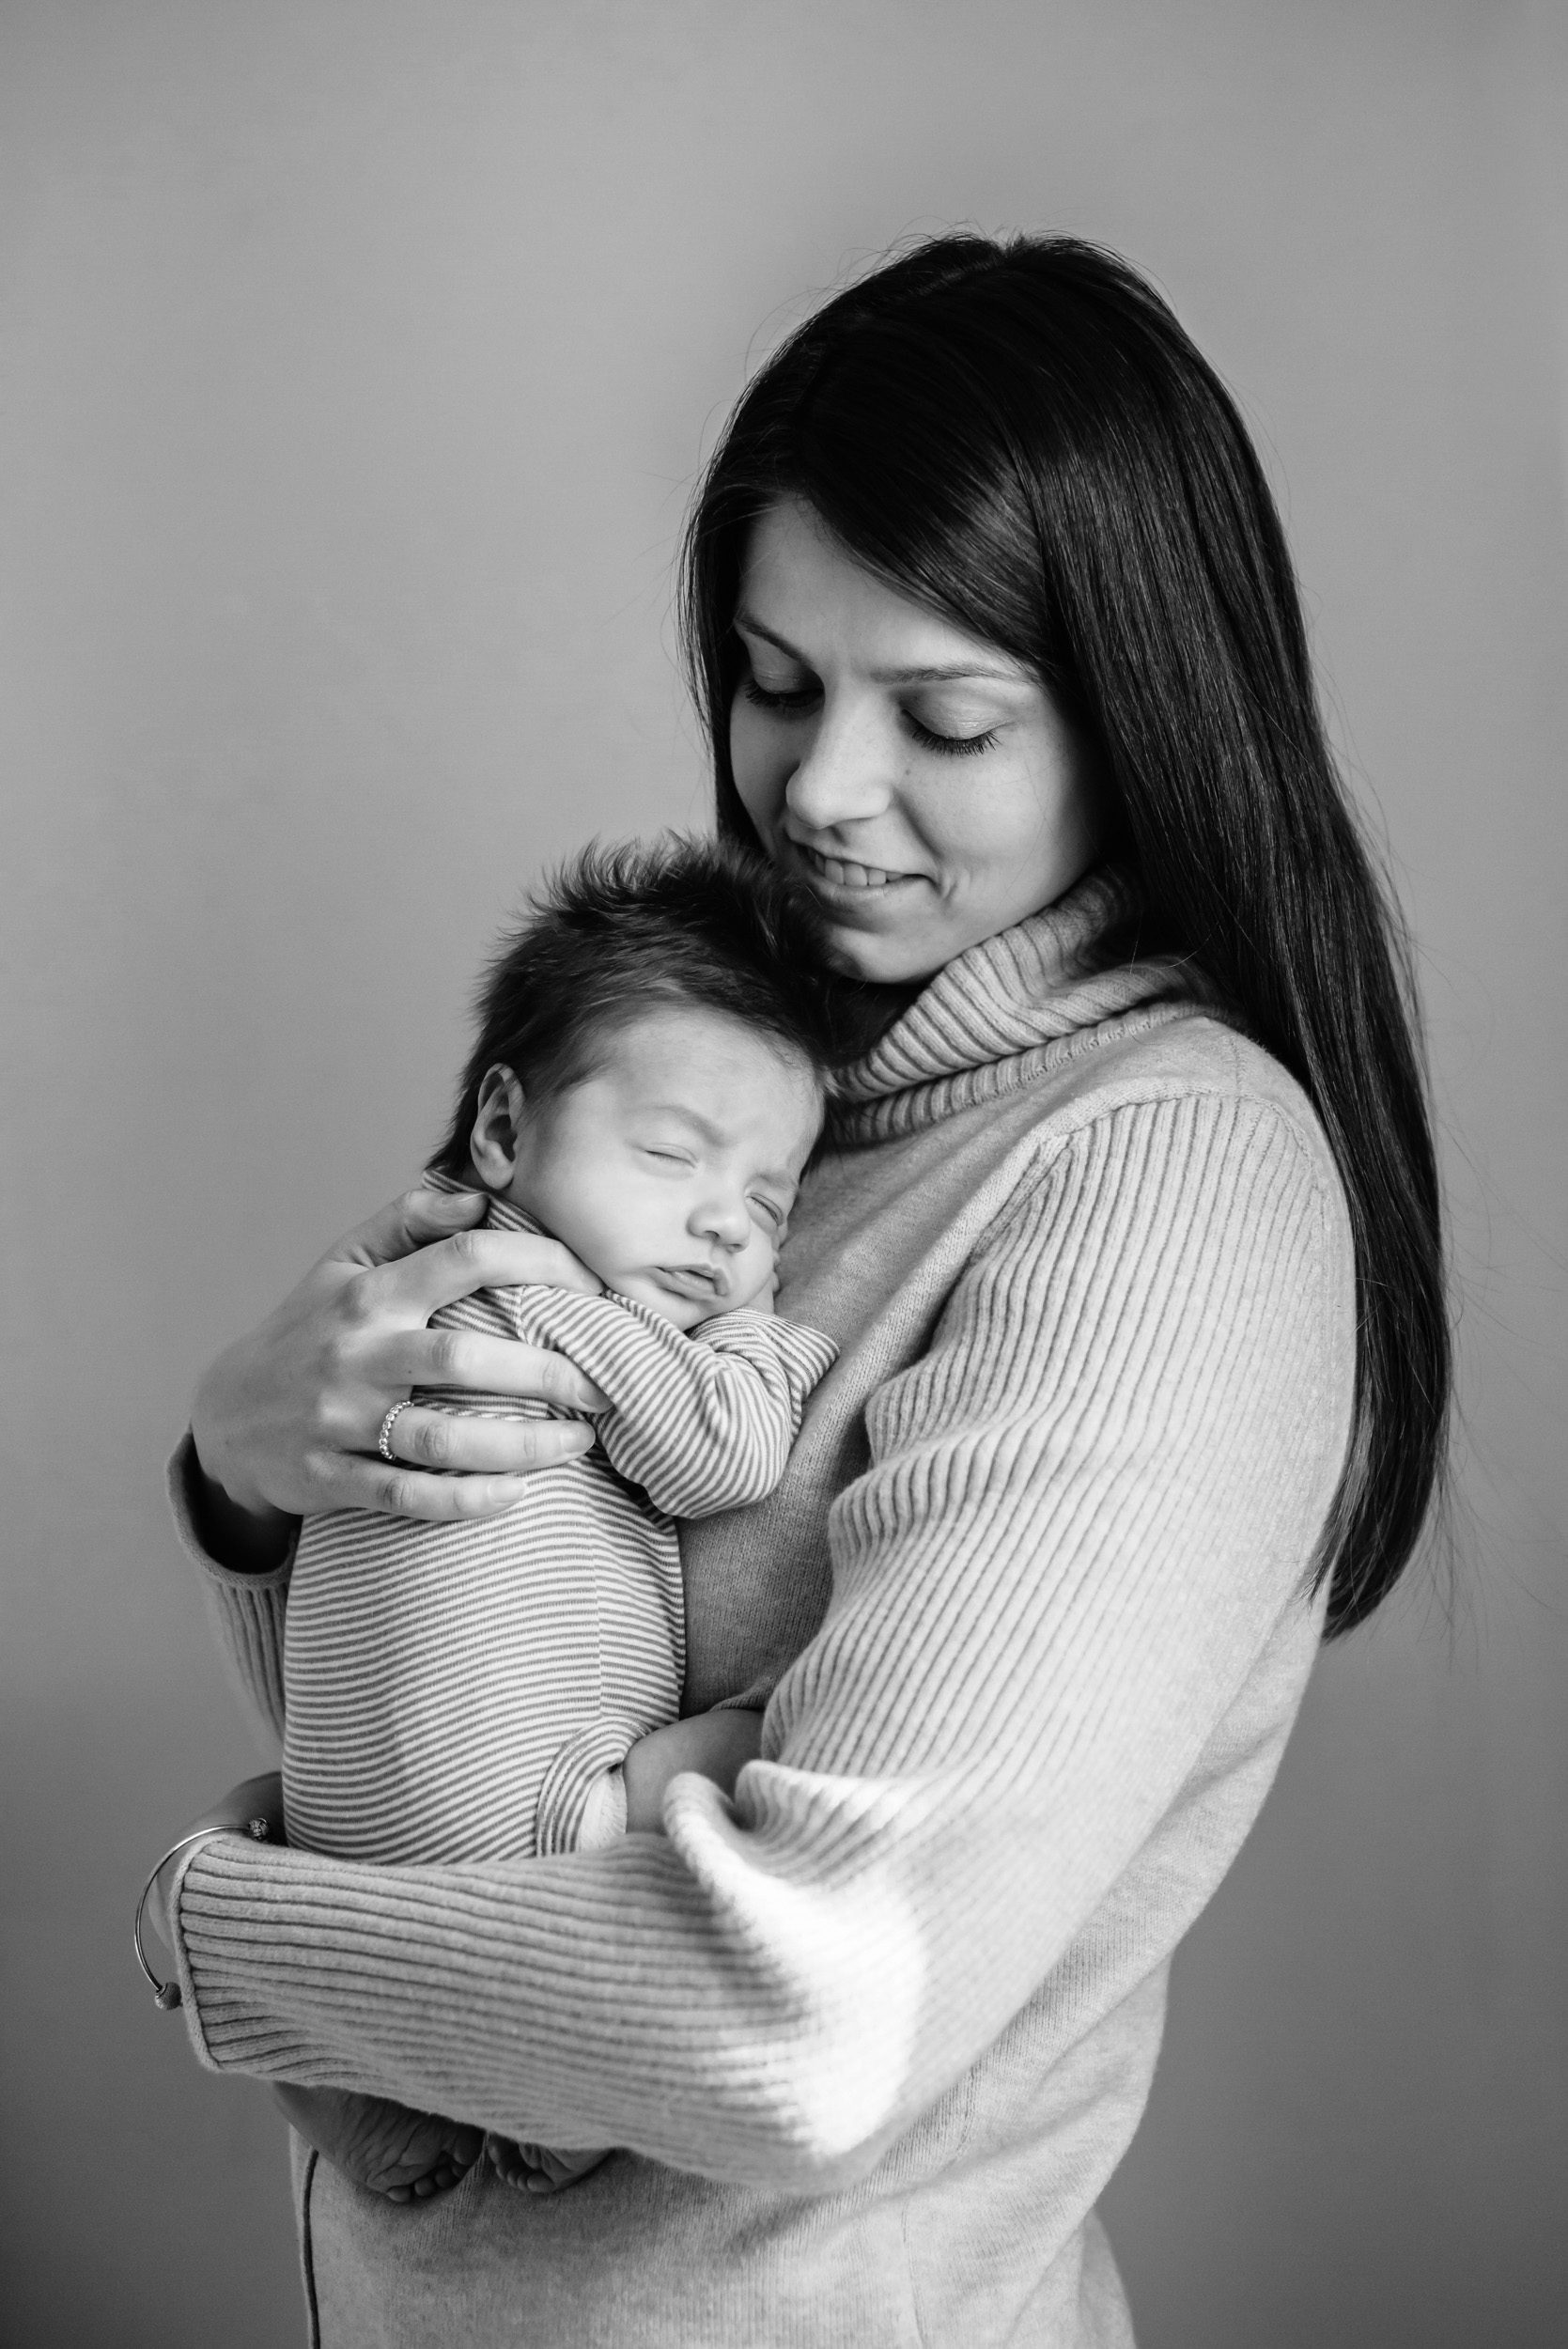 Newborn photo of a mom snuggling her baby boy against her chest during a natural newborn photoshoot